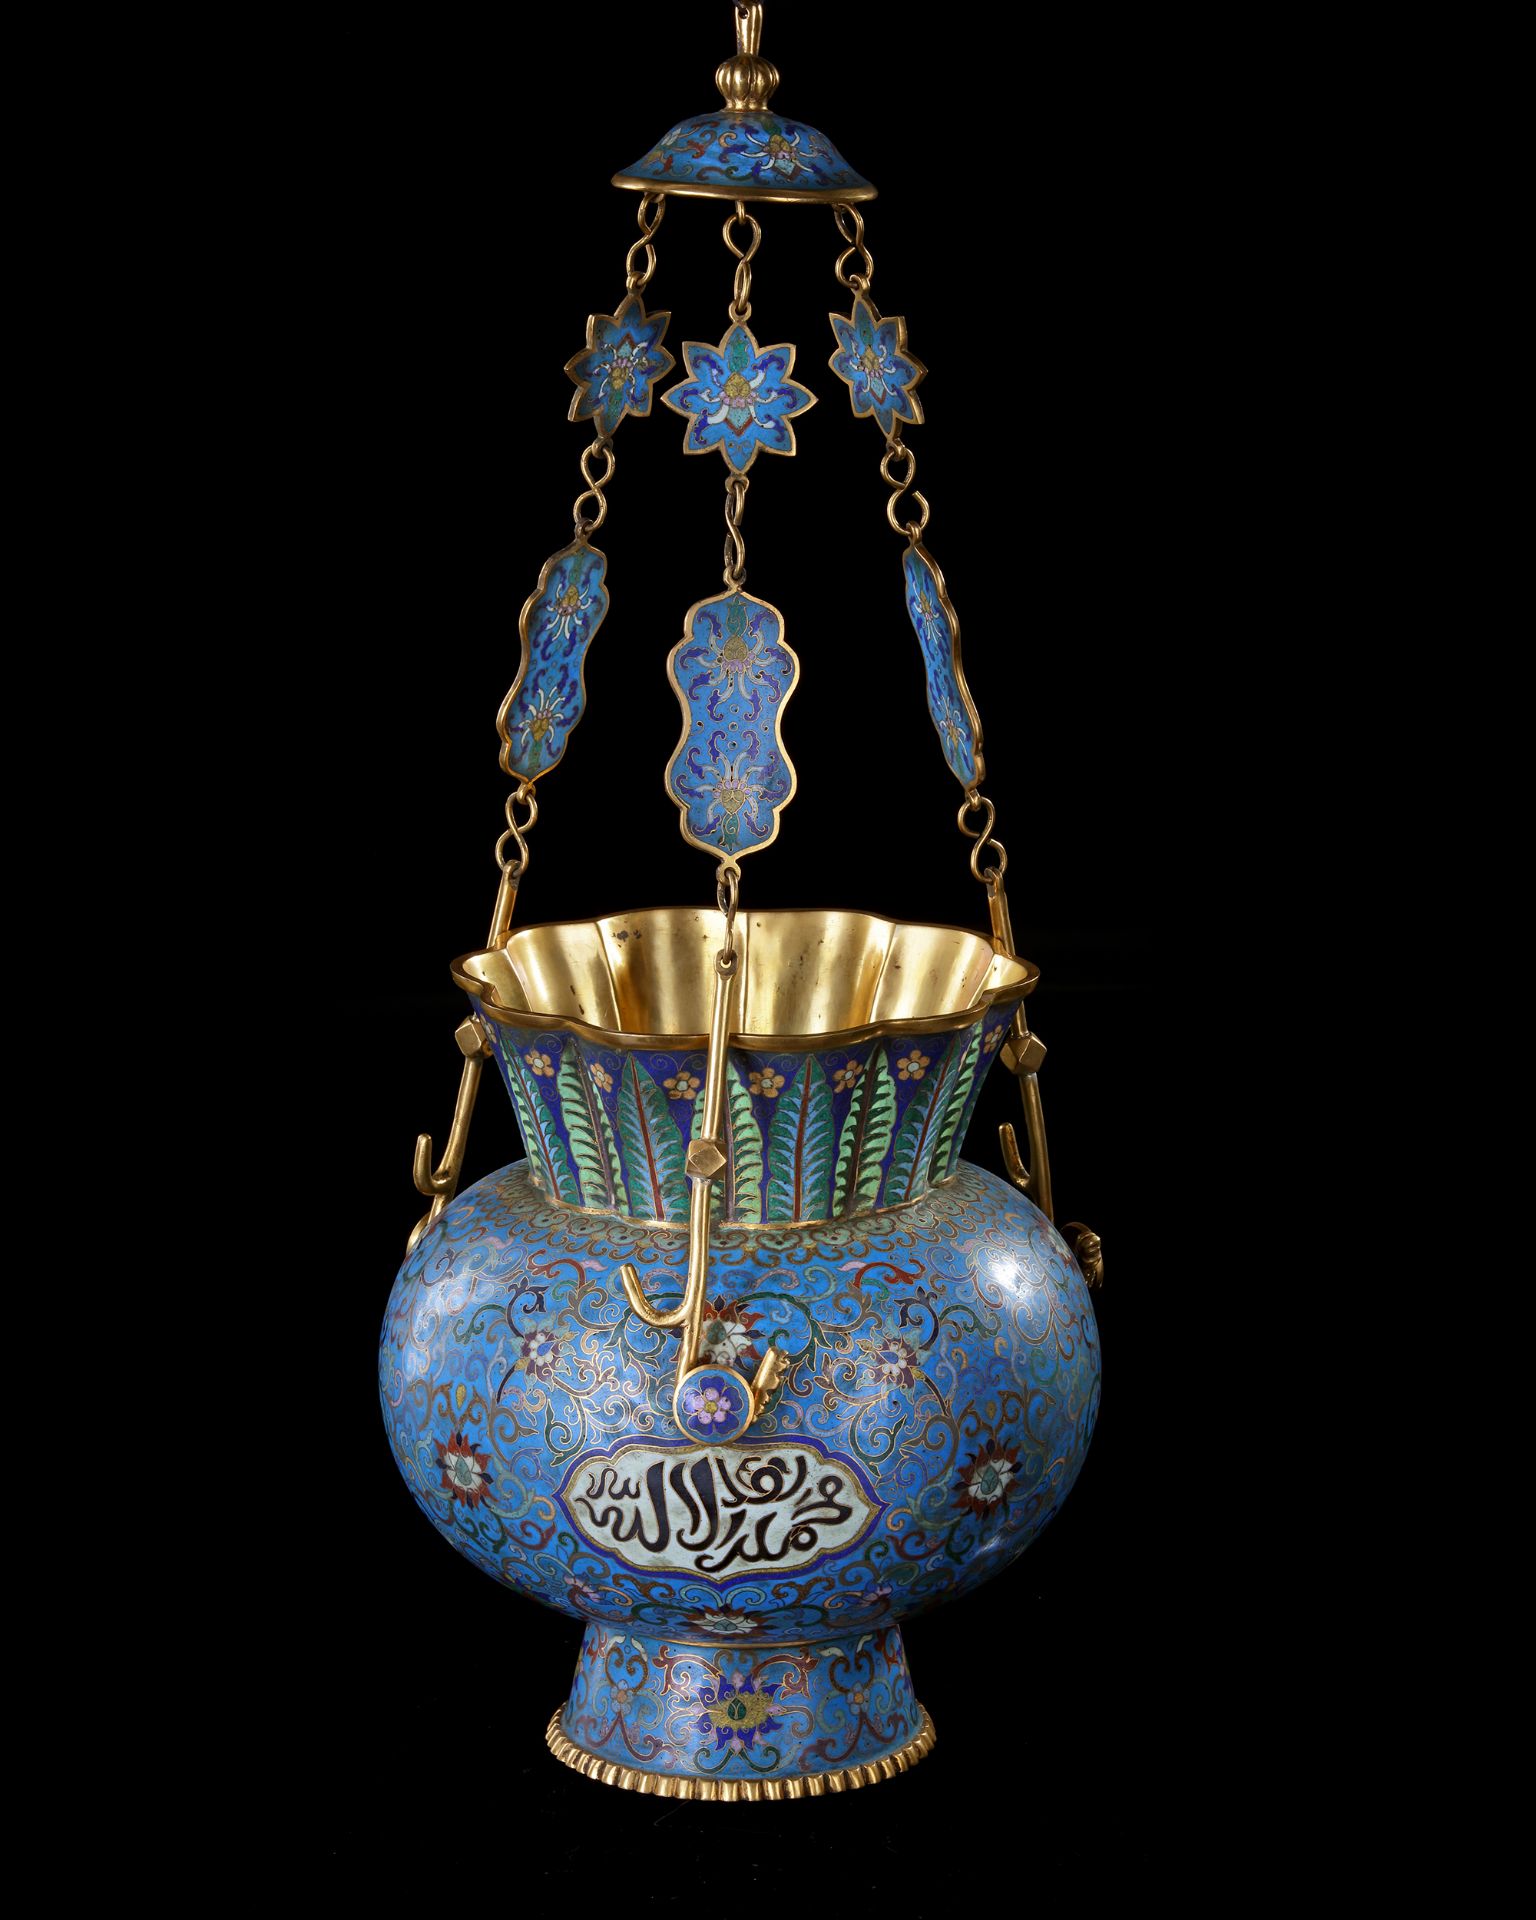 A CHINESE CLOISONNÉ MOSQUE LAMP FOR THE ISLAMIC MARKET, LATE 19TH CENTURY - Image 5 of 10